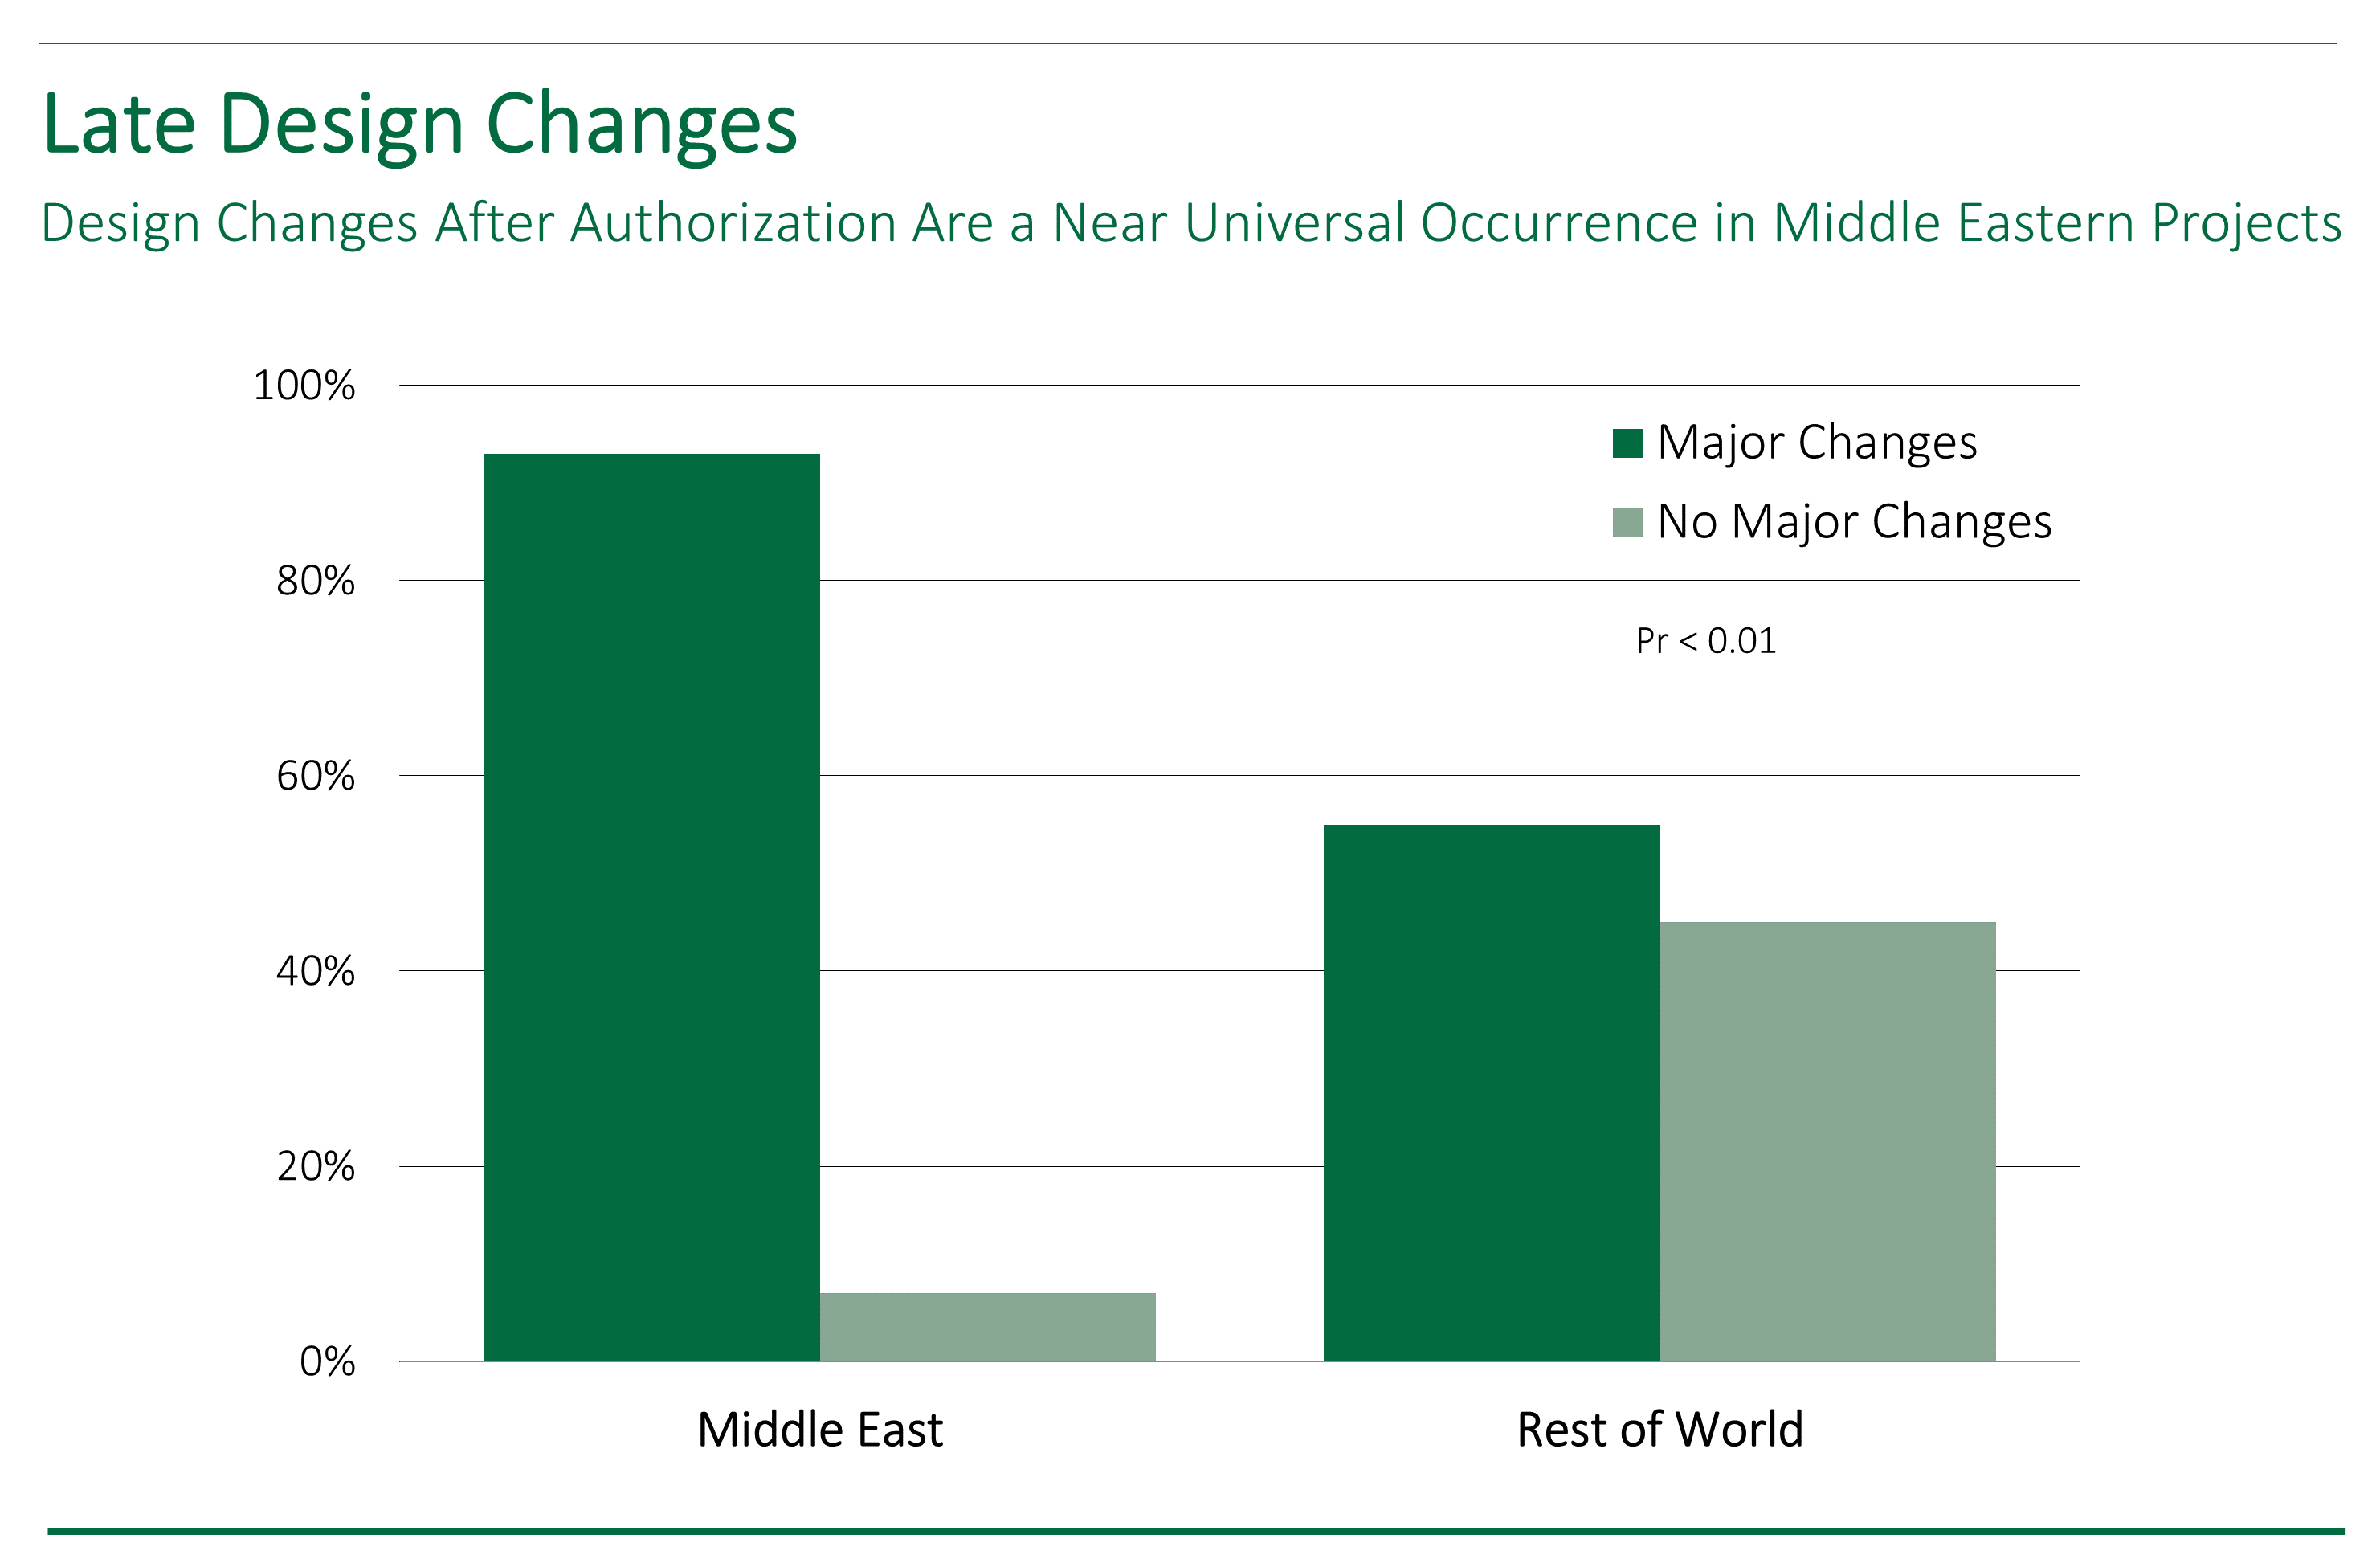 Bar chart shoing that late design changes after authorization occur on nearly all Middle Eastern capital projects.